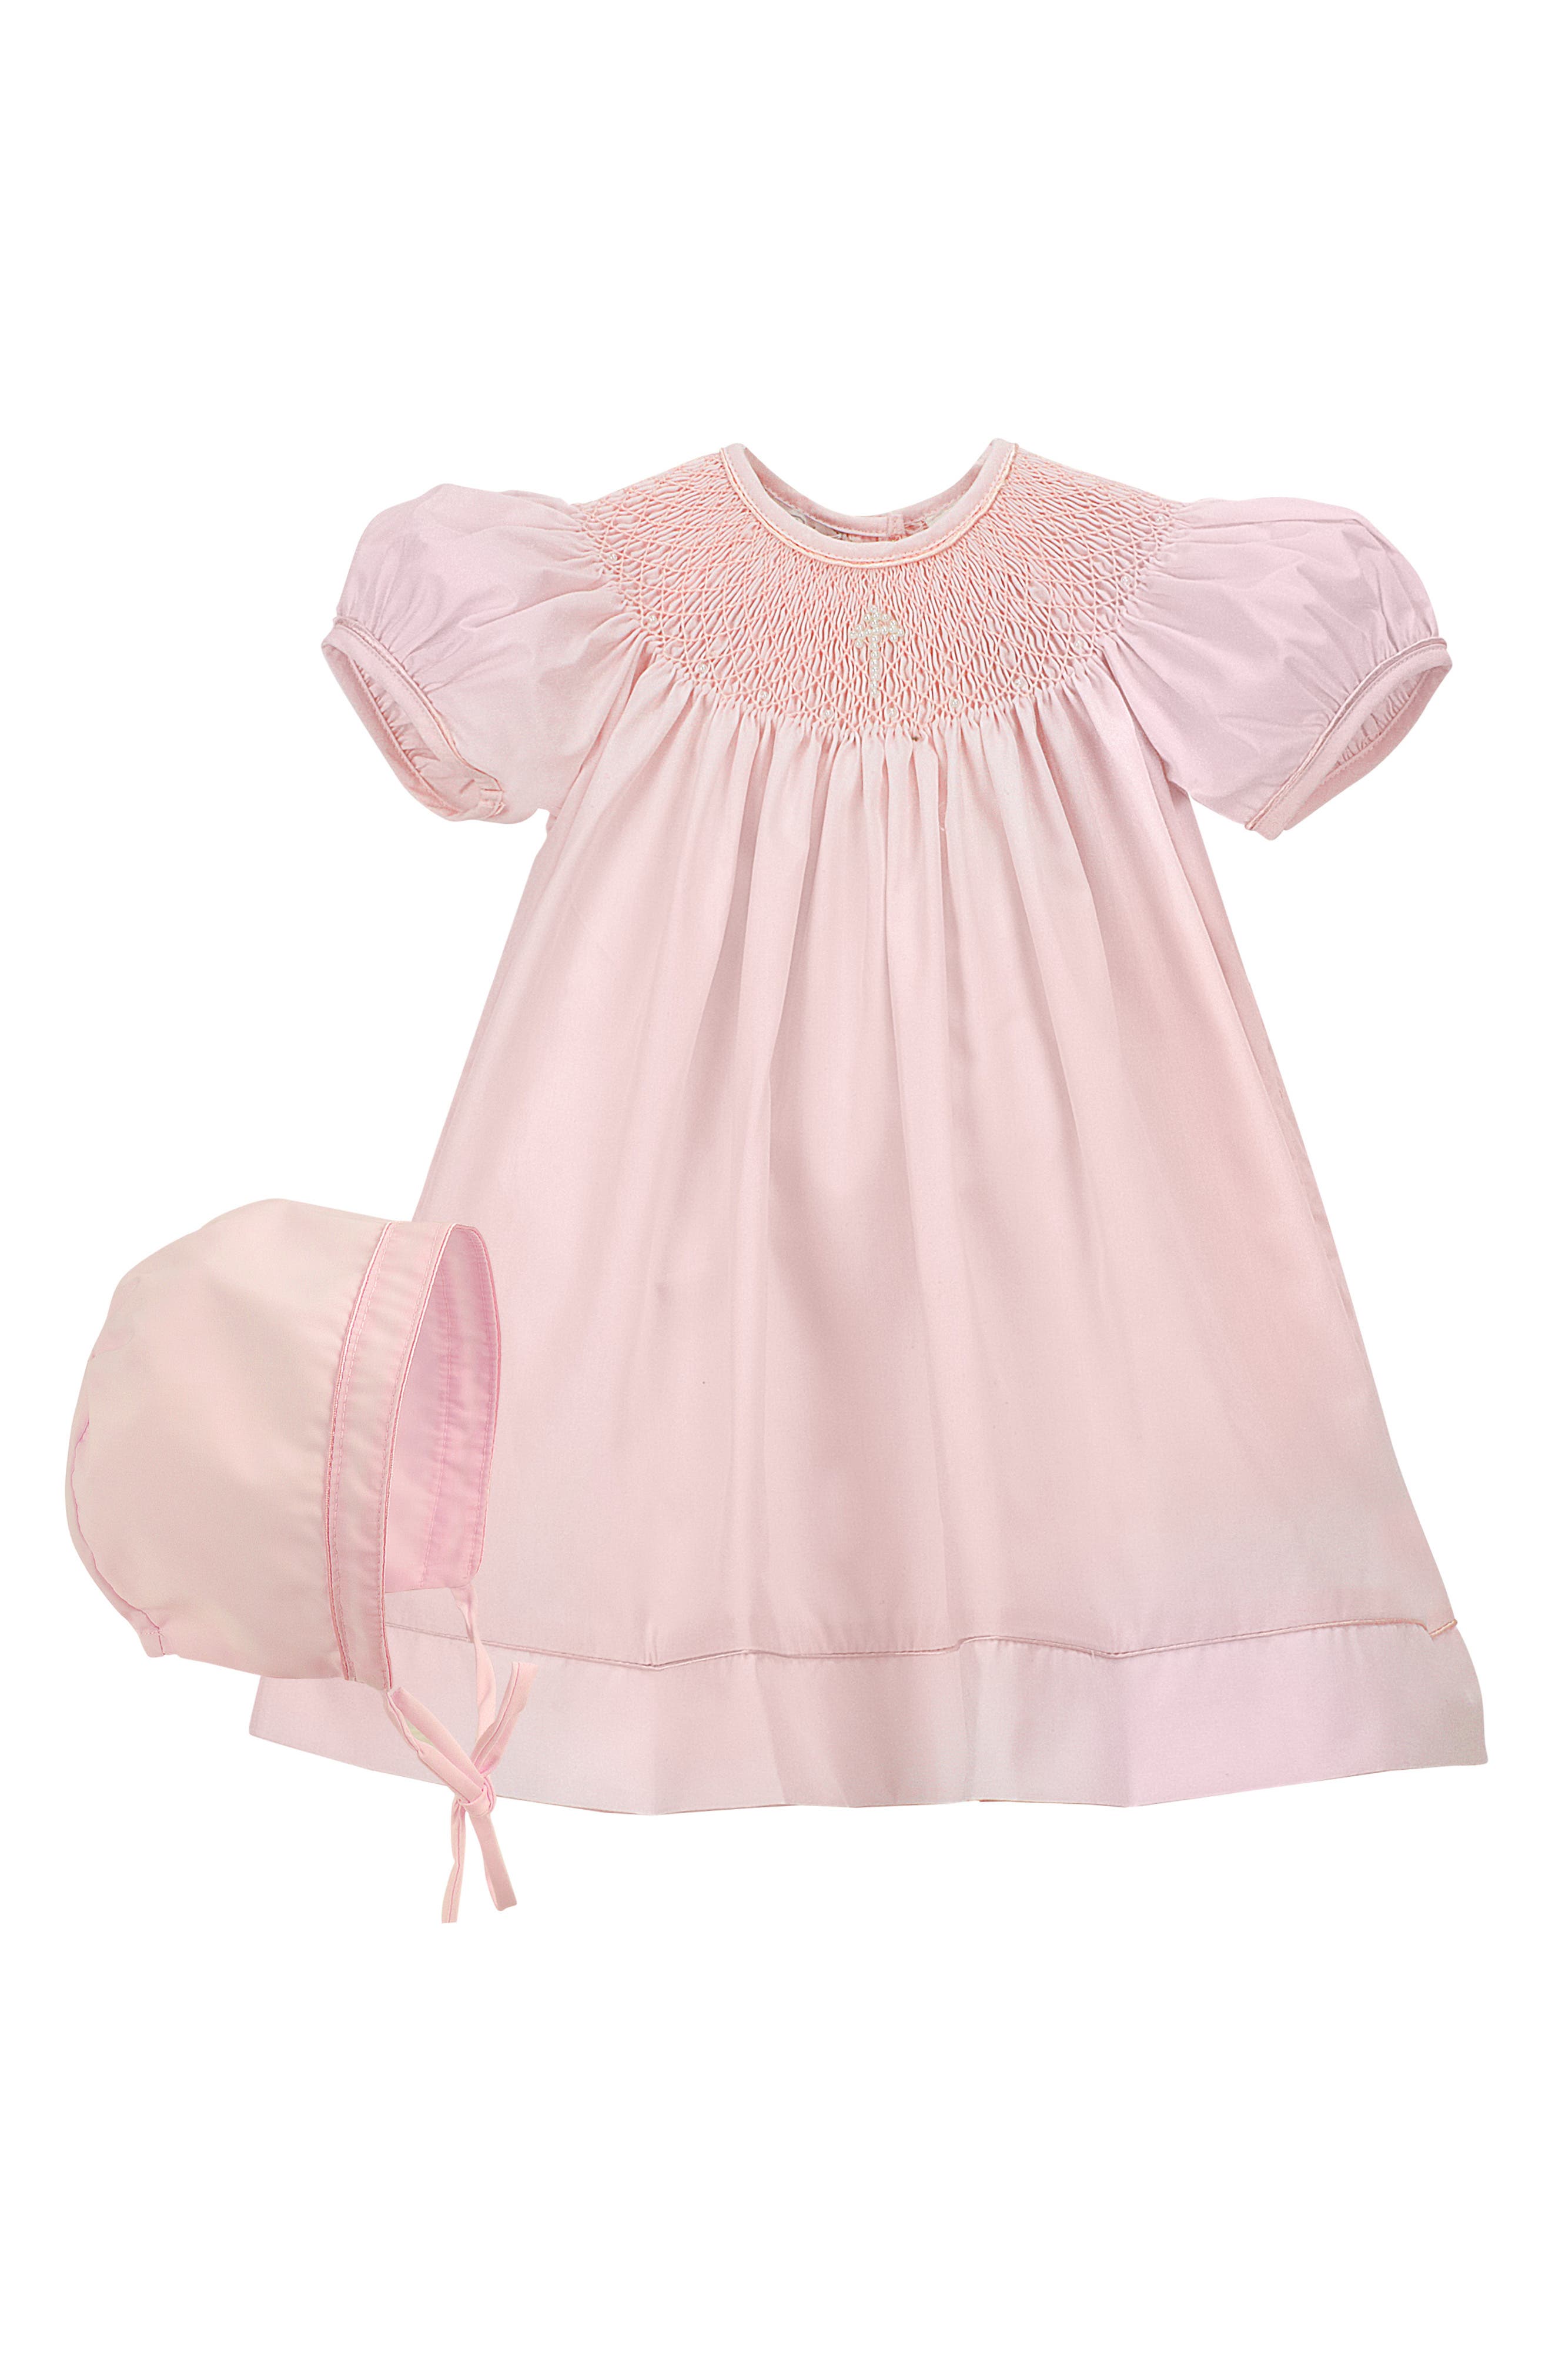 Cherish The Moment Girls Infant Christening White Gown with Pink Sash & Bonnet 